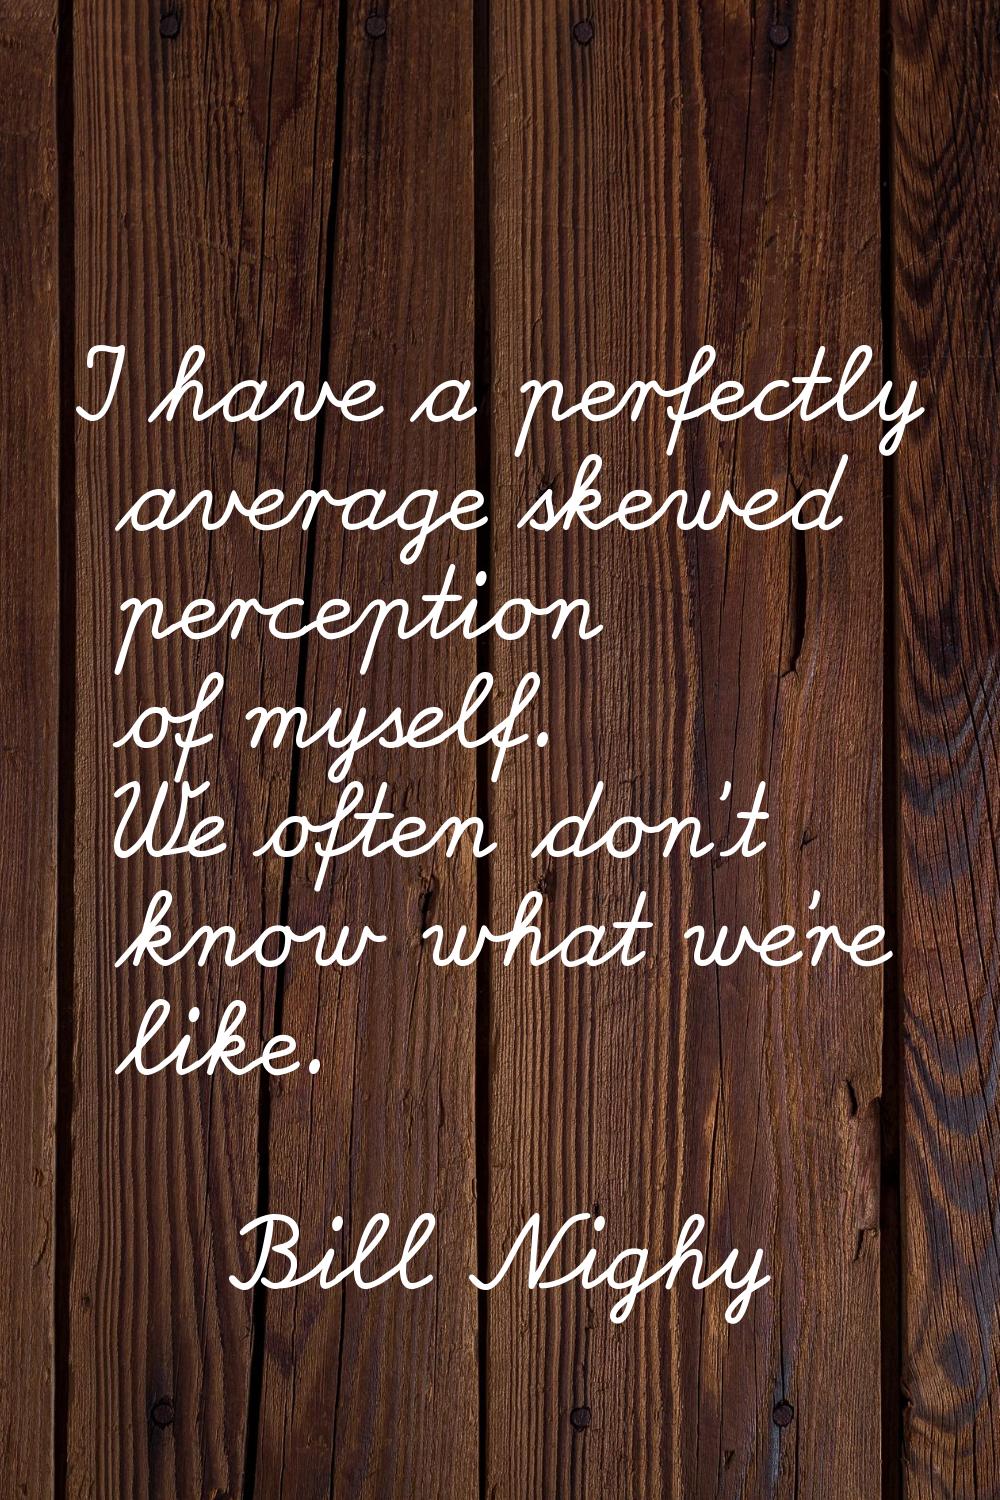 I have a perfectly average skewed perception of myself. We often don't know what we're like.